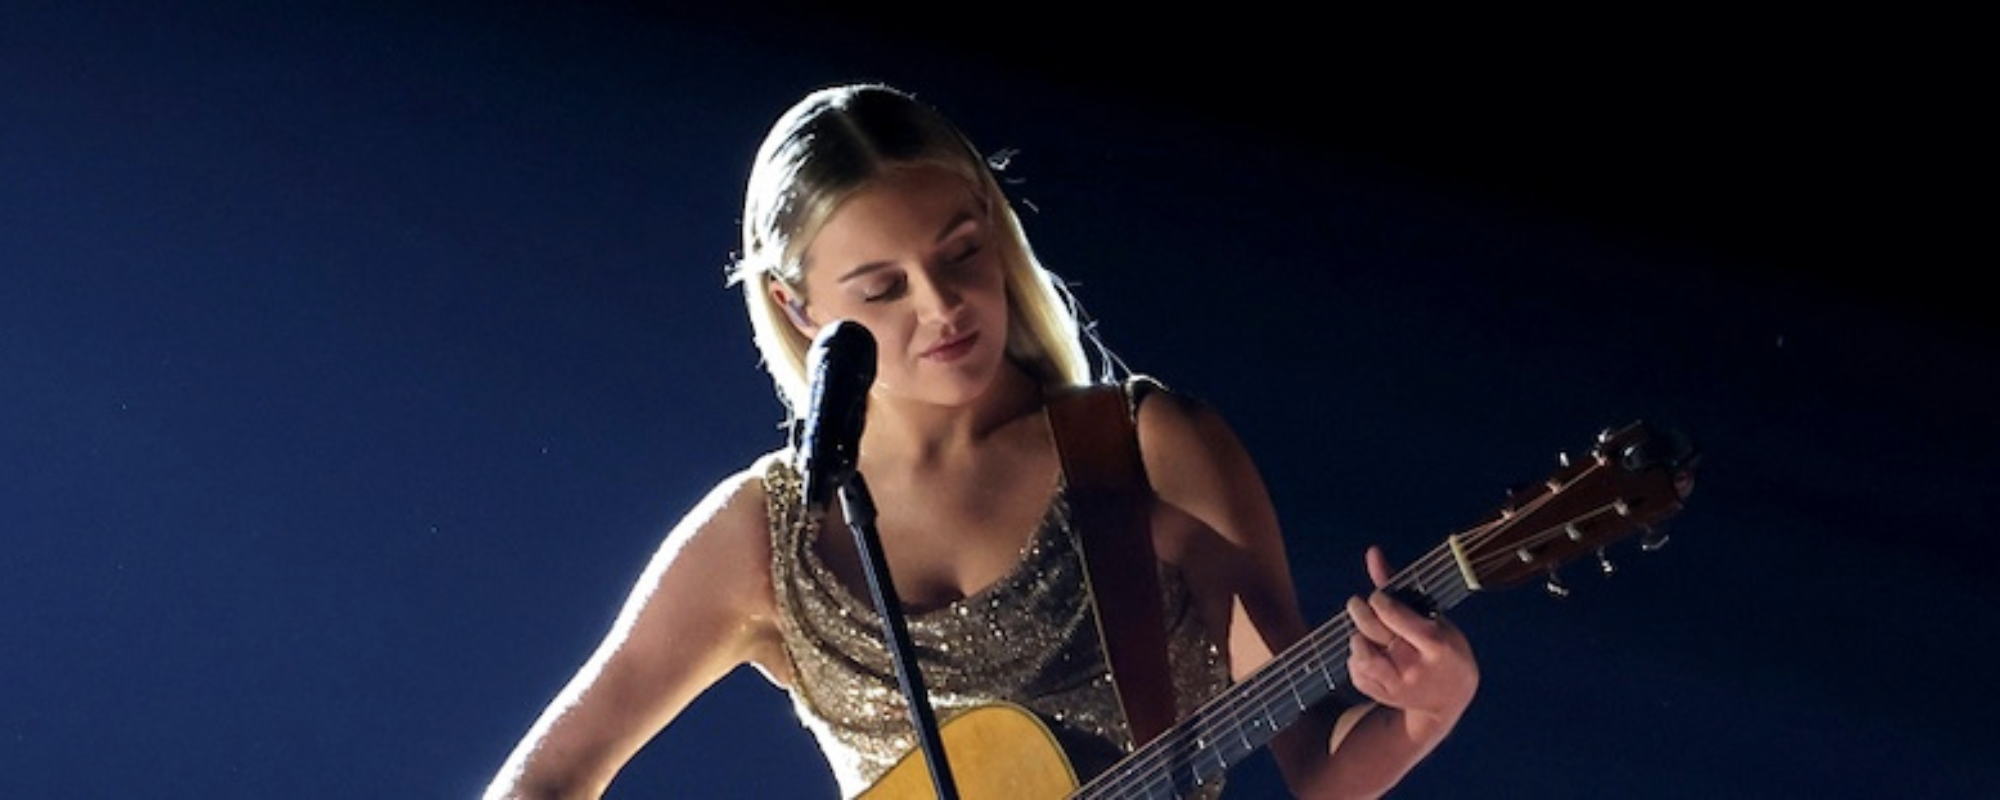 Kelsea Ballerini Delivers Acoustic Performance of “Leave Me Again” at 2023 CMA Awards